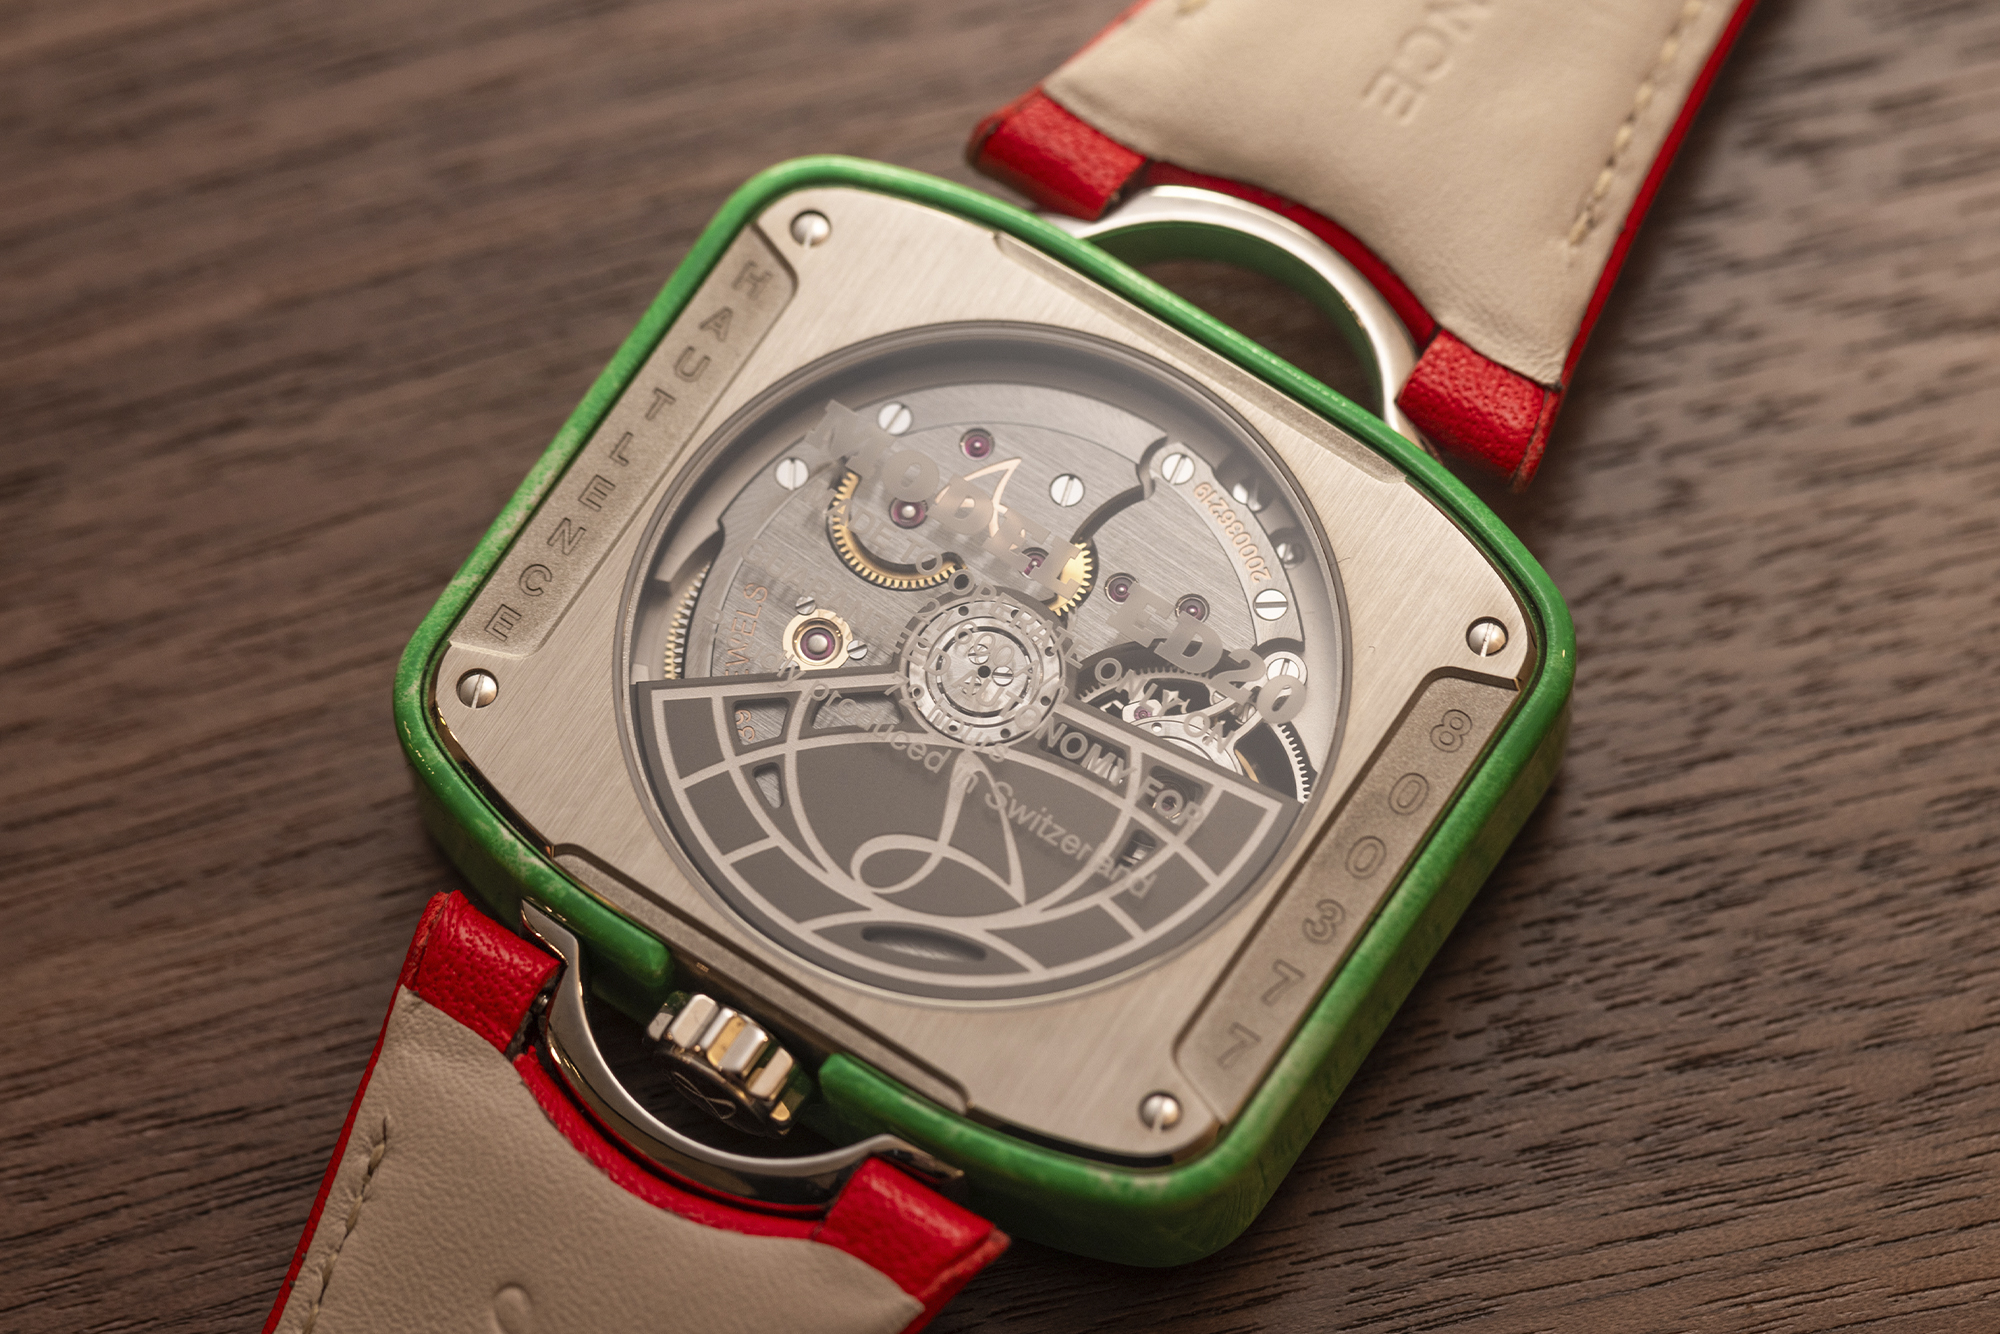 hautlence retrovision watches and wonders